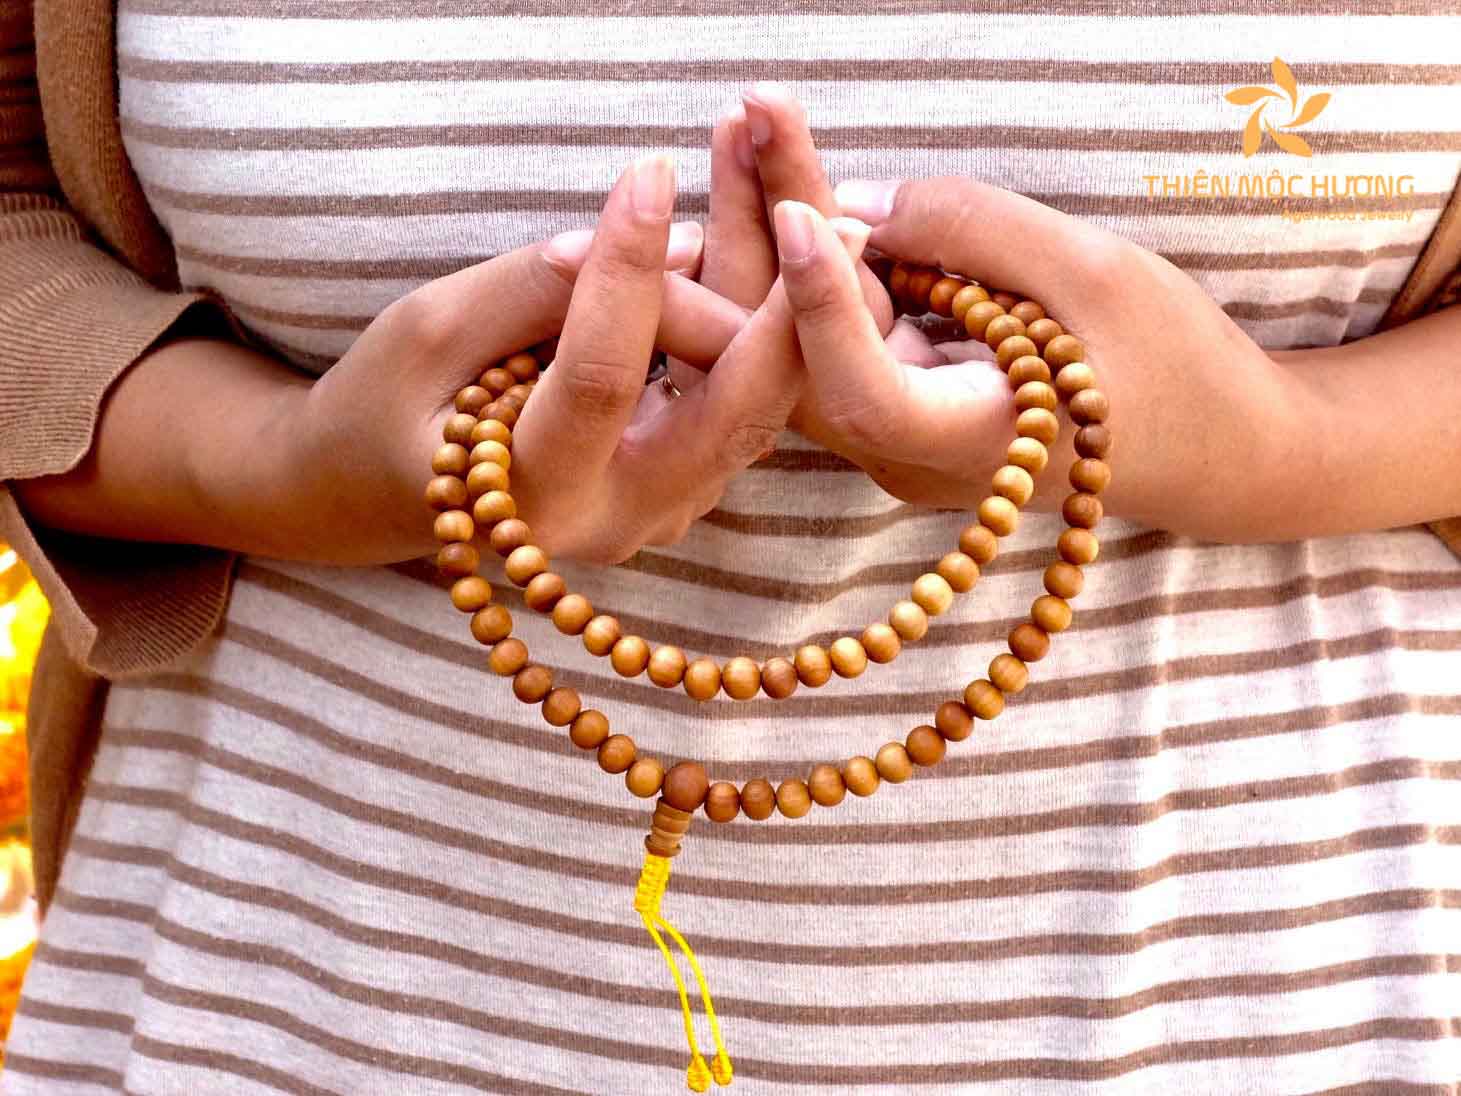 Mala beads assists in grounding your focus during meditation